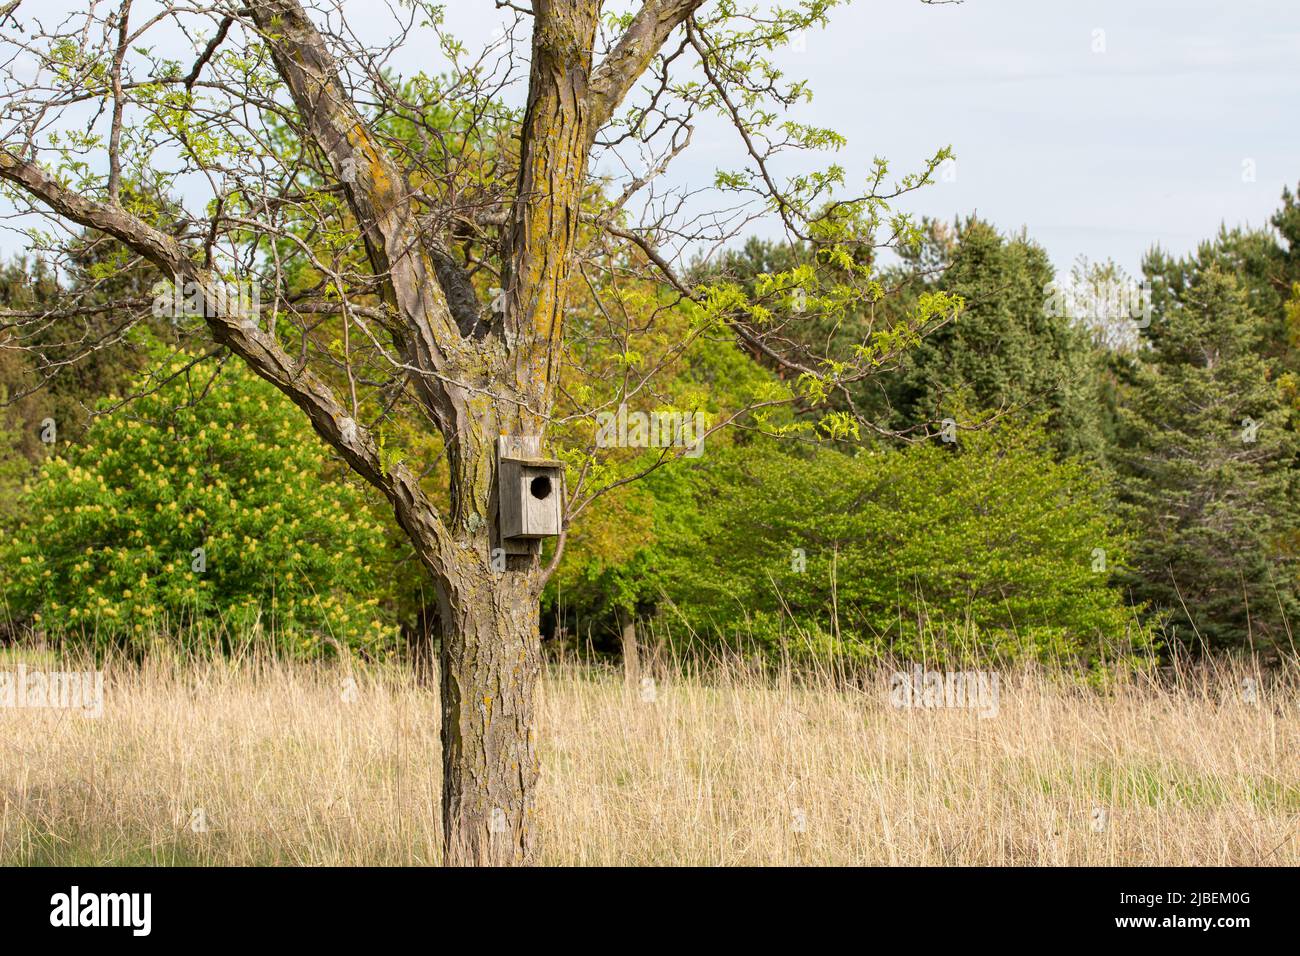 Landscape view of a wood duck house attached to a tree in a rural treelined prairie on a sunny day Stock Photo